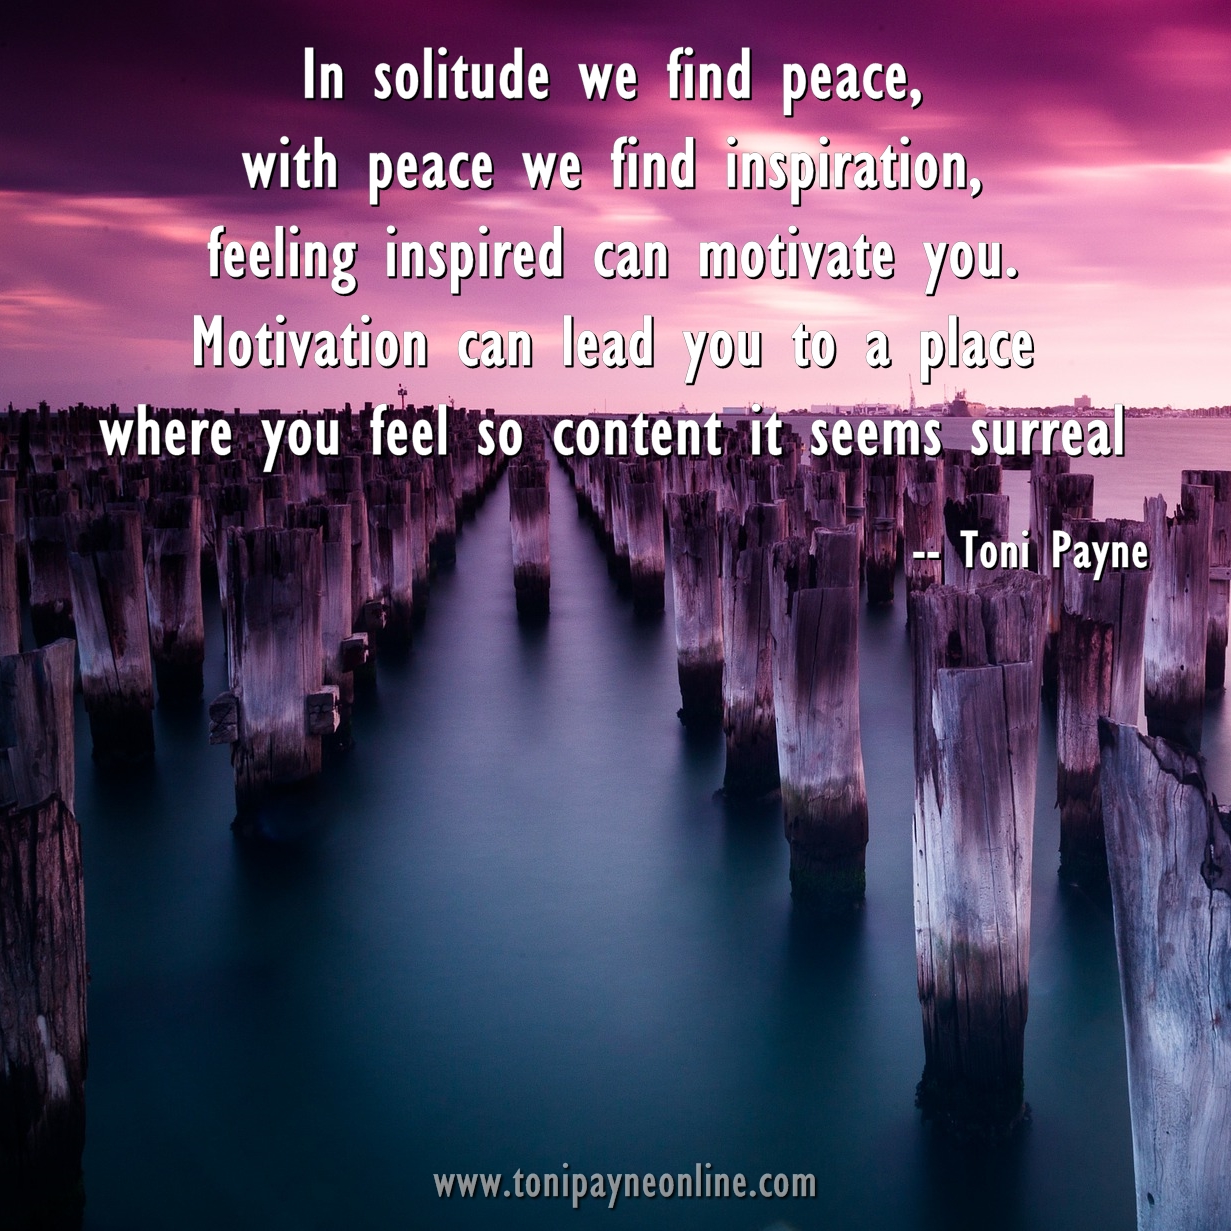 Quote about Peace Solitude Inspiration